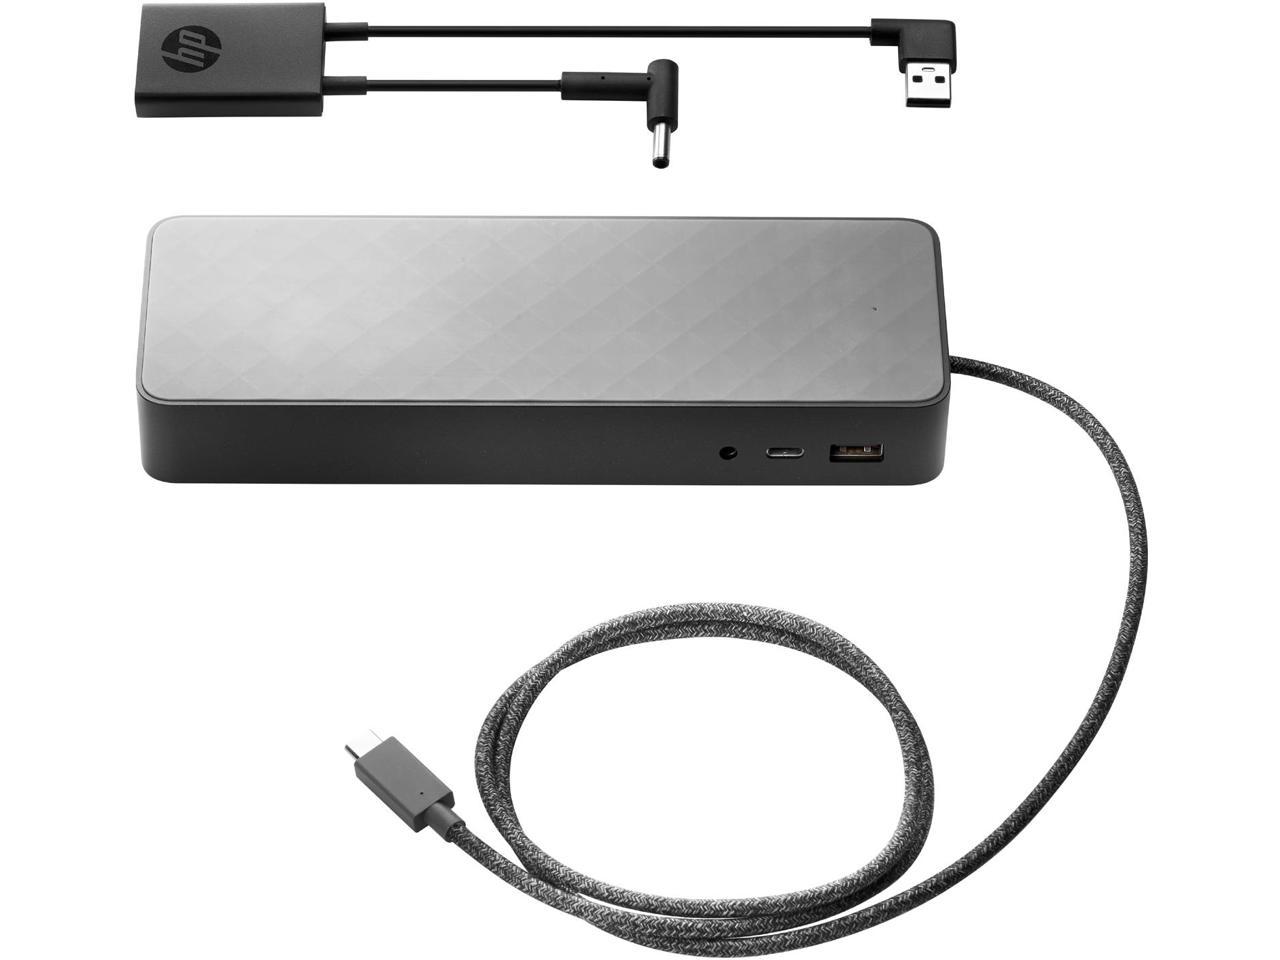 Hp 4.5Mm And Usb Dock Adapter